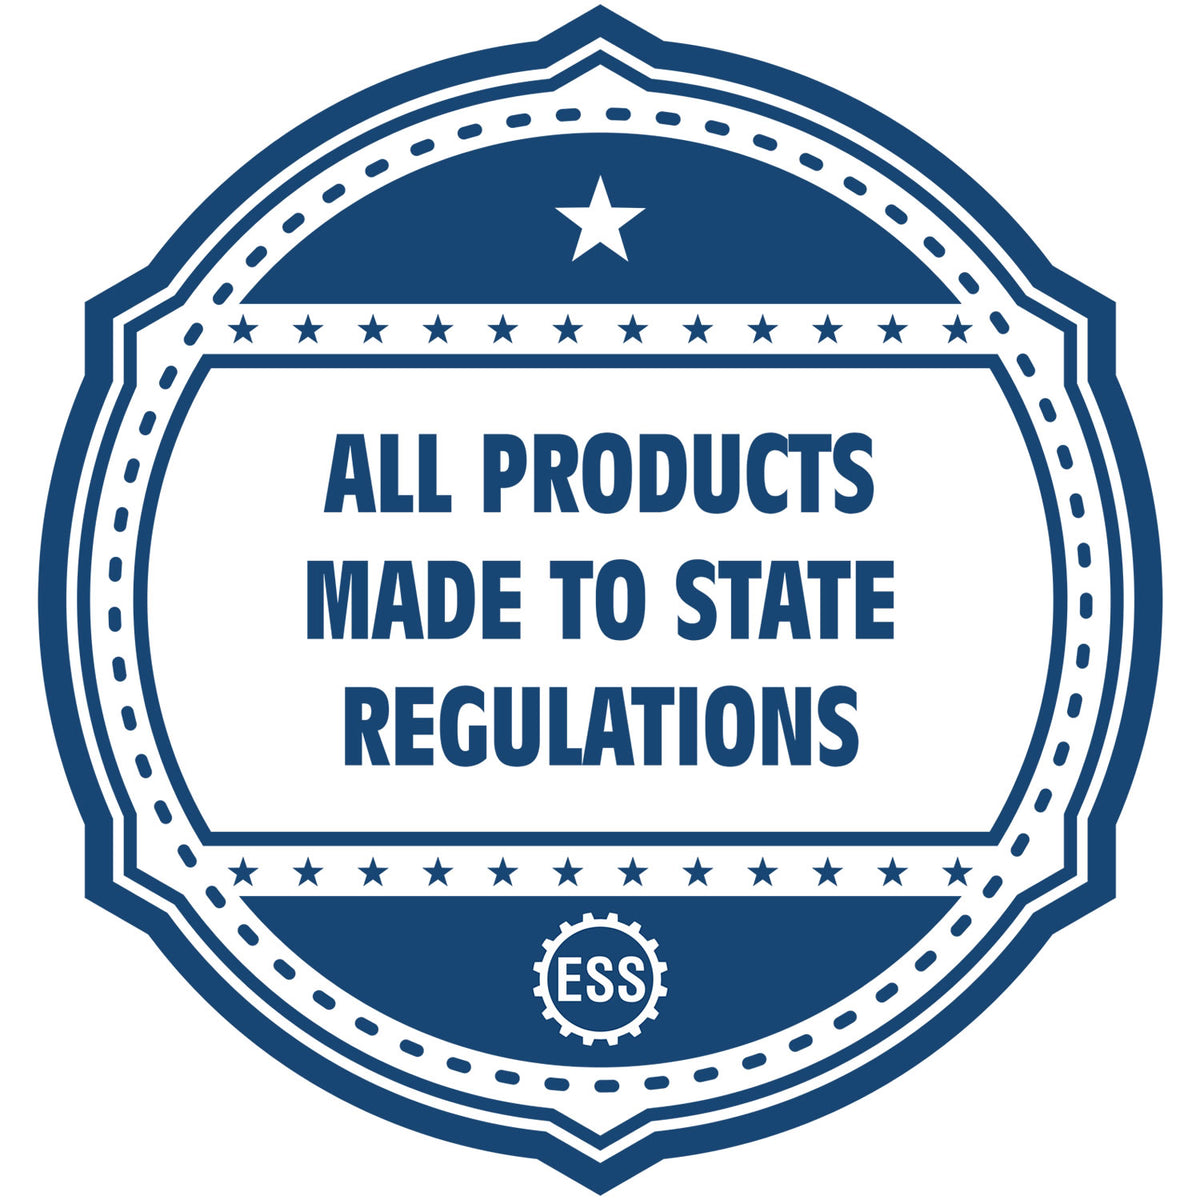 An icon or badge element for the Heavy-Duty New Hampshire Rectangular Notary Stamp showing that this product is made in compliance with state regulations.